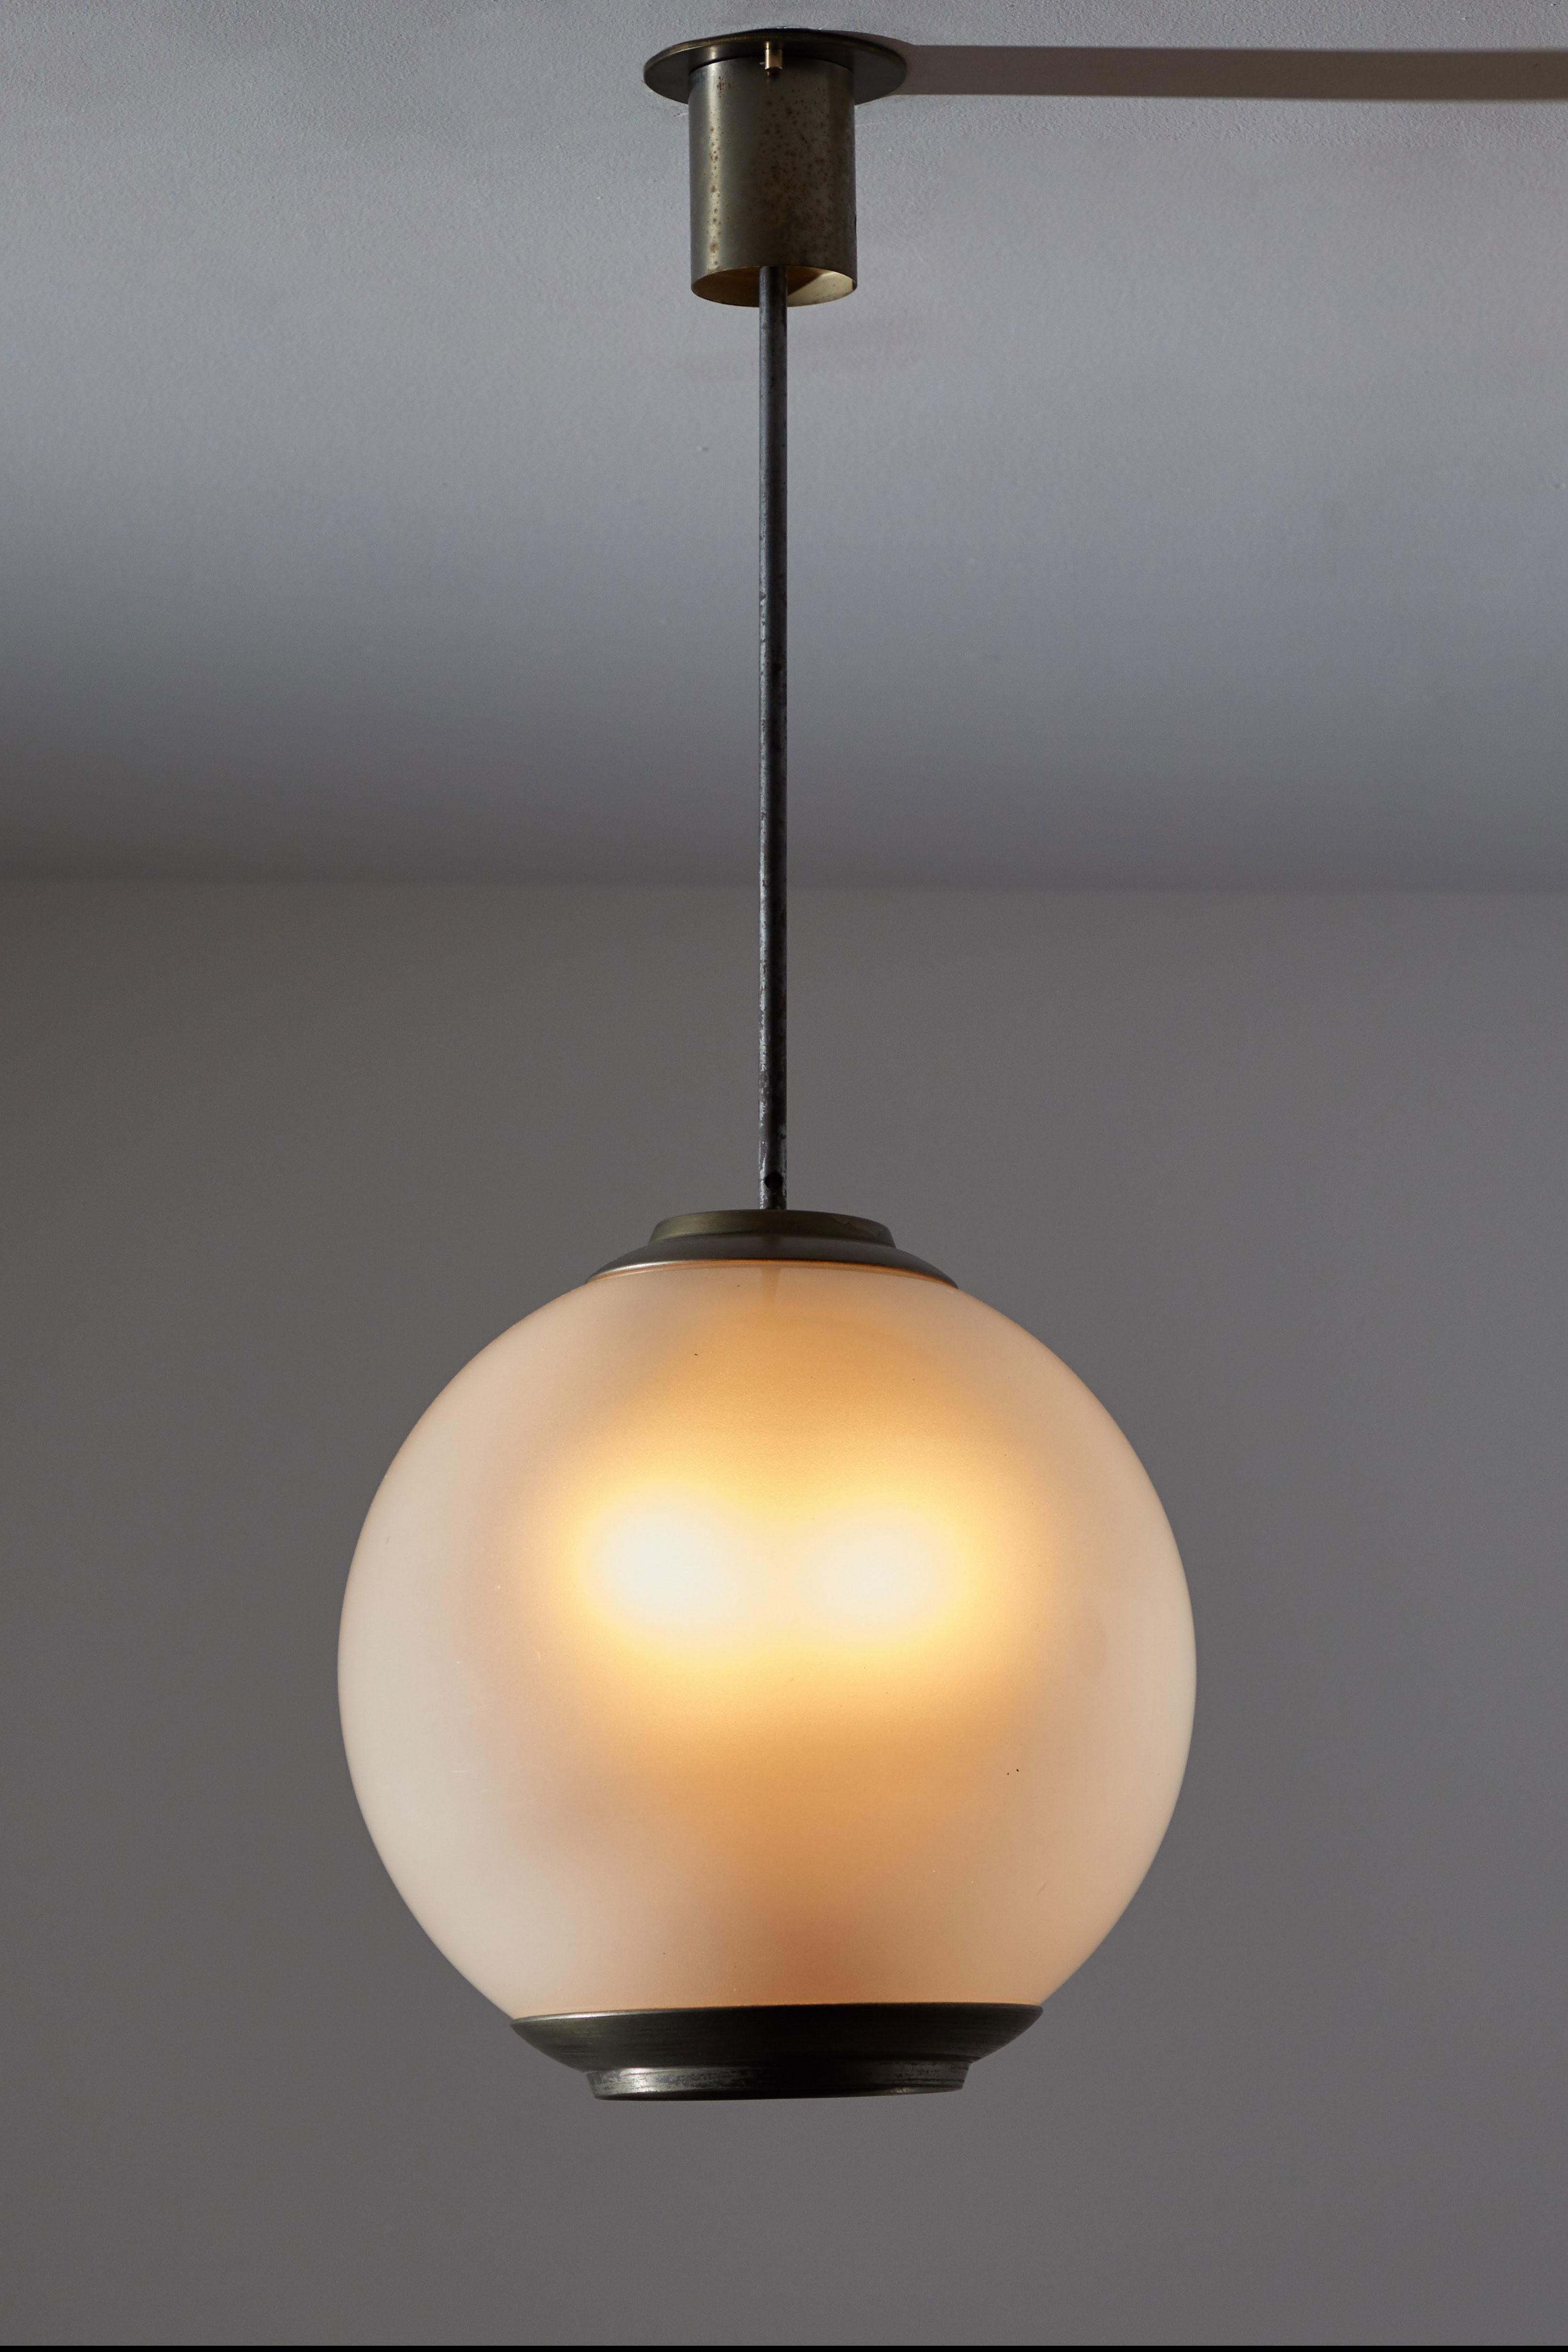 Single Pendant by Caccia Dominioni for Azucena. Designed and manufactured in Italy, circa 1950s. Opaline glass diffusers, steel stem and canopy, pewter hardware. Rewired for US junction boxes. Custom nickel plated brass ceiling plate. Each pendant